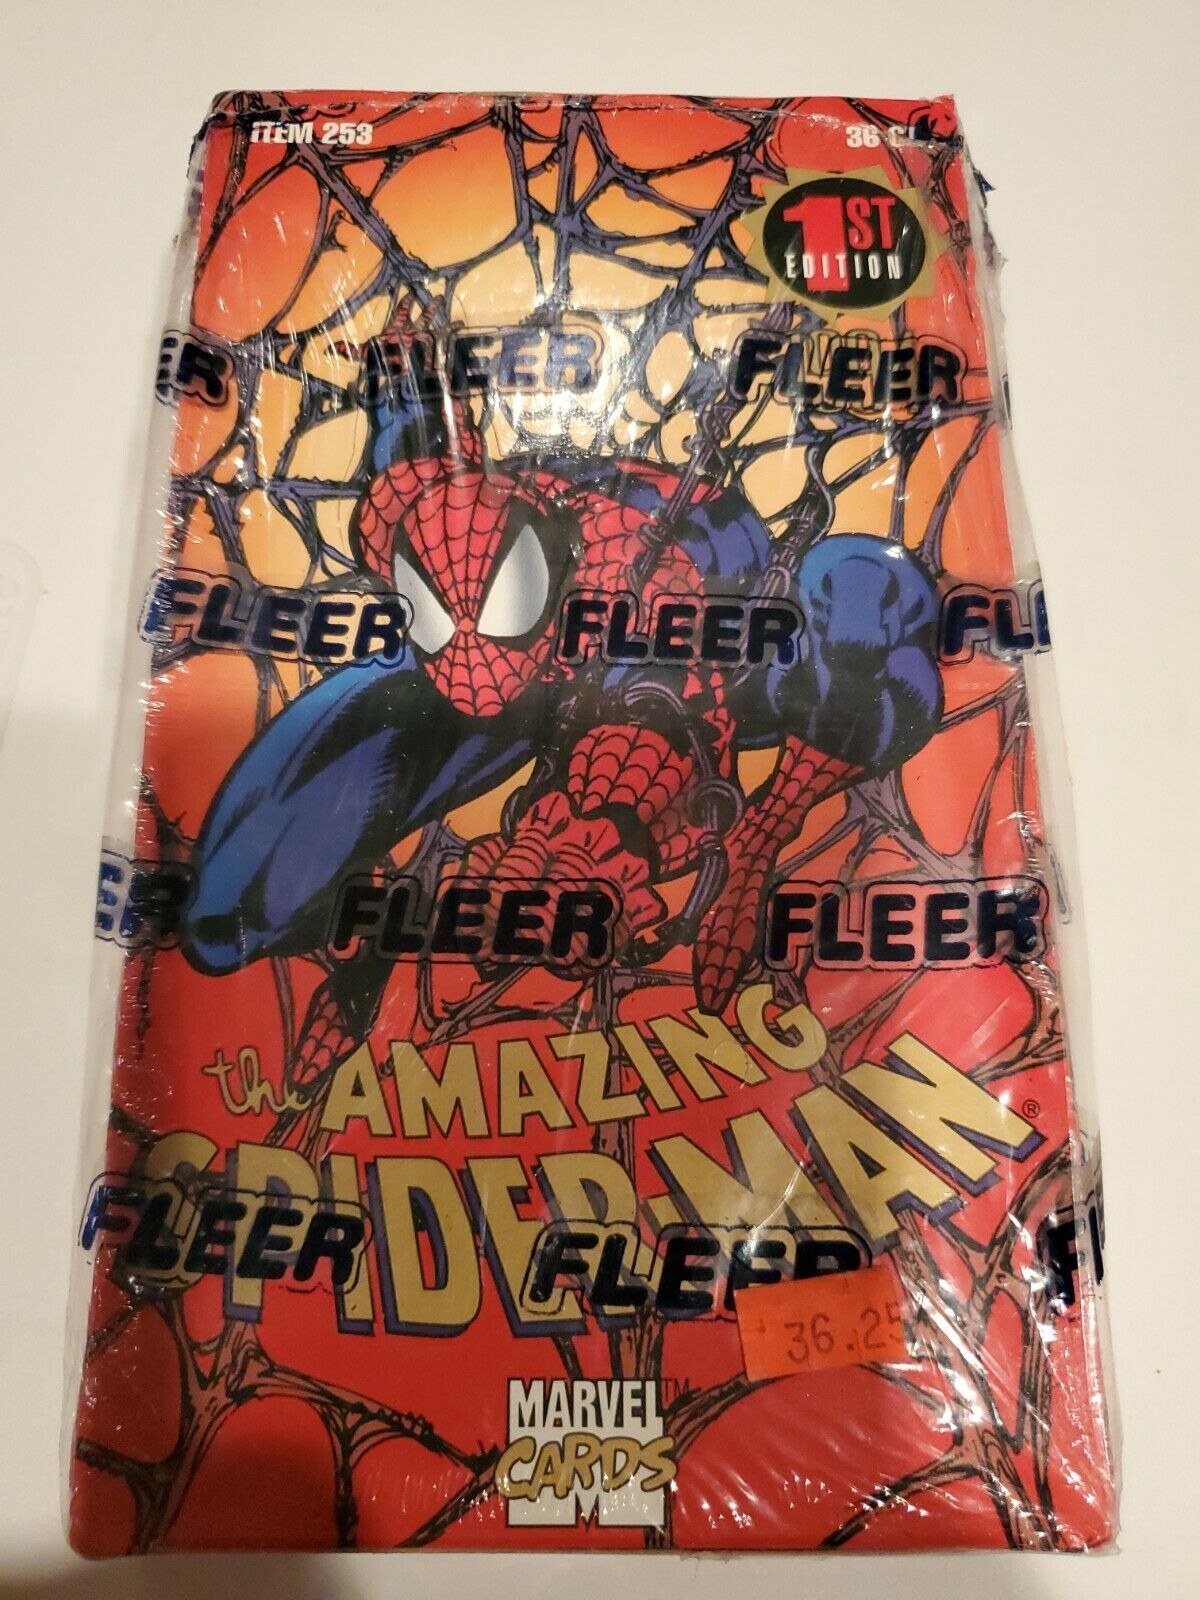 New 1994 Fleer Marvel The Amazing Spider-man 1st Edition Factory Sealed Box 36ct